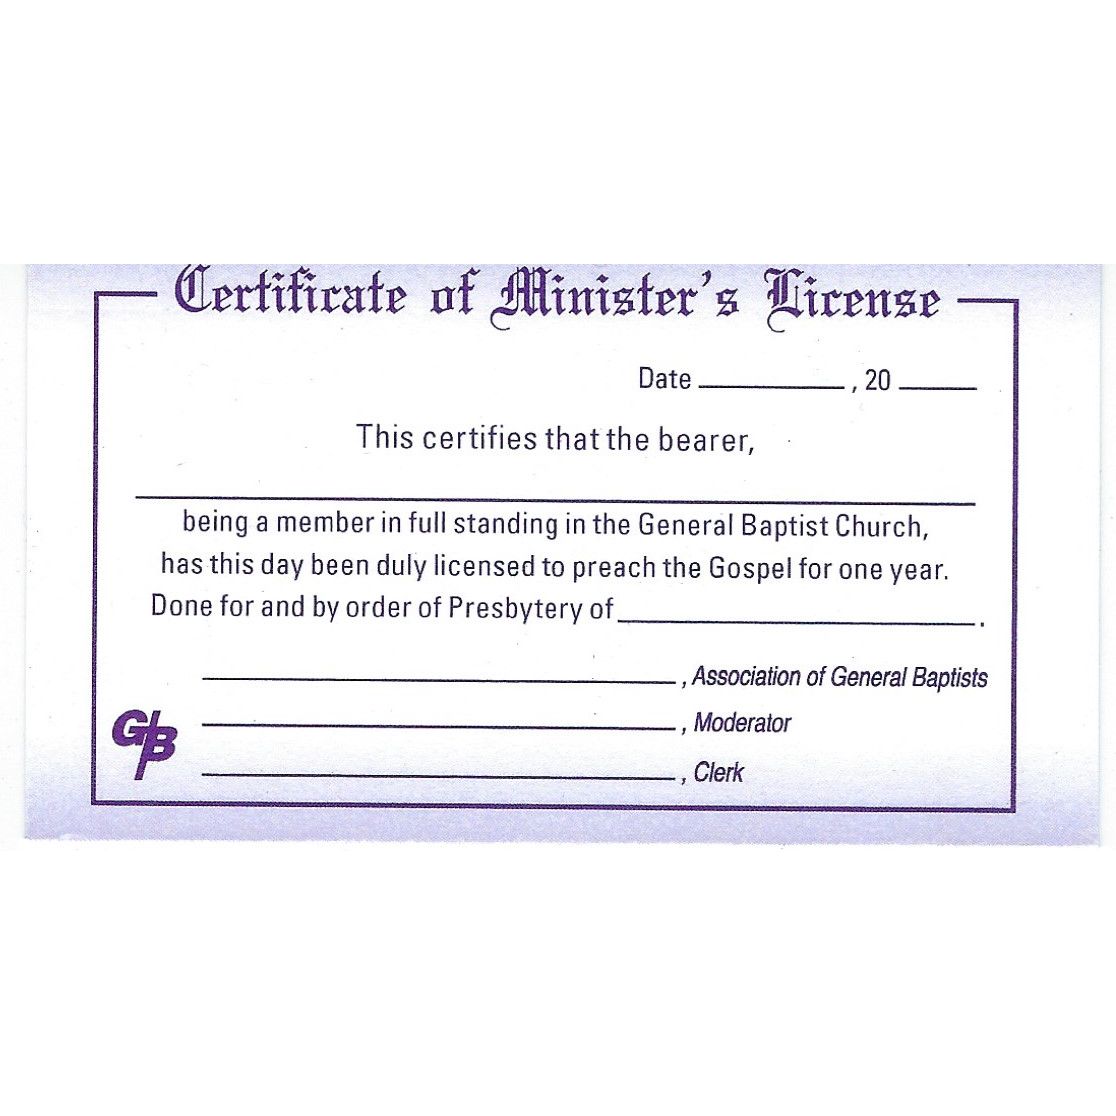 general-baptist-items-certificate-of-minister-s-license-card